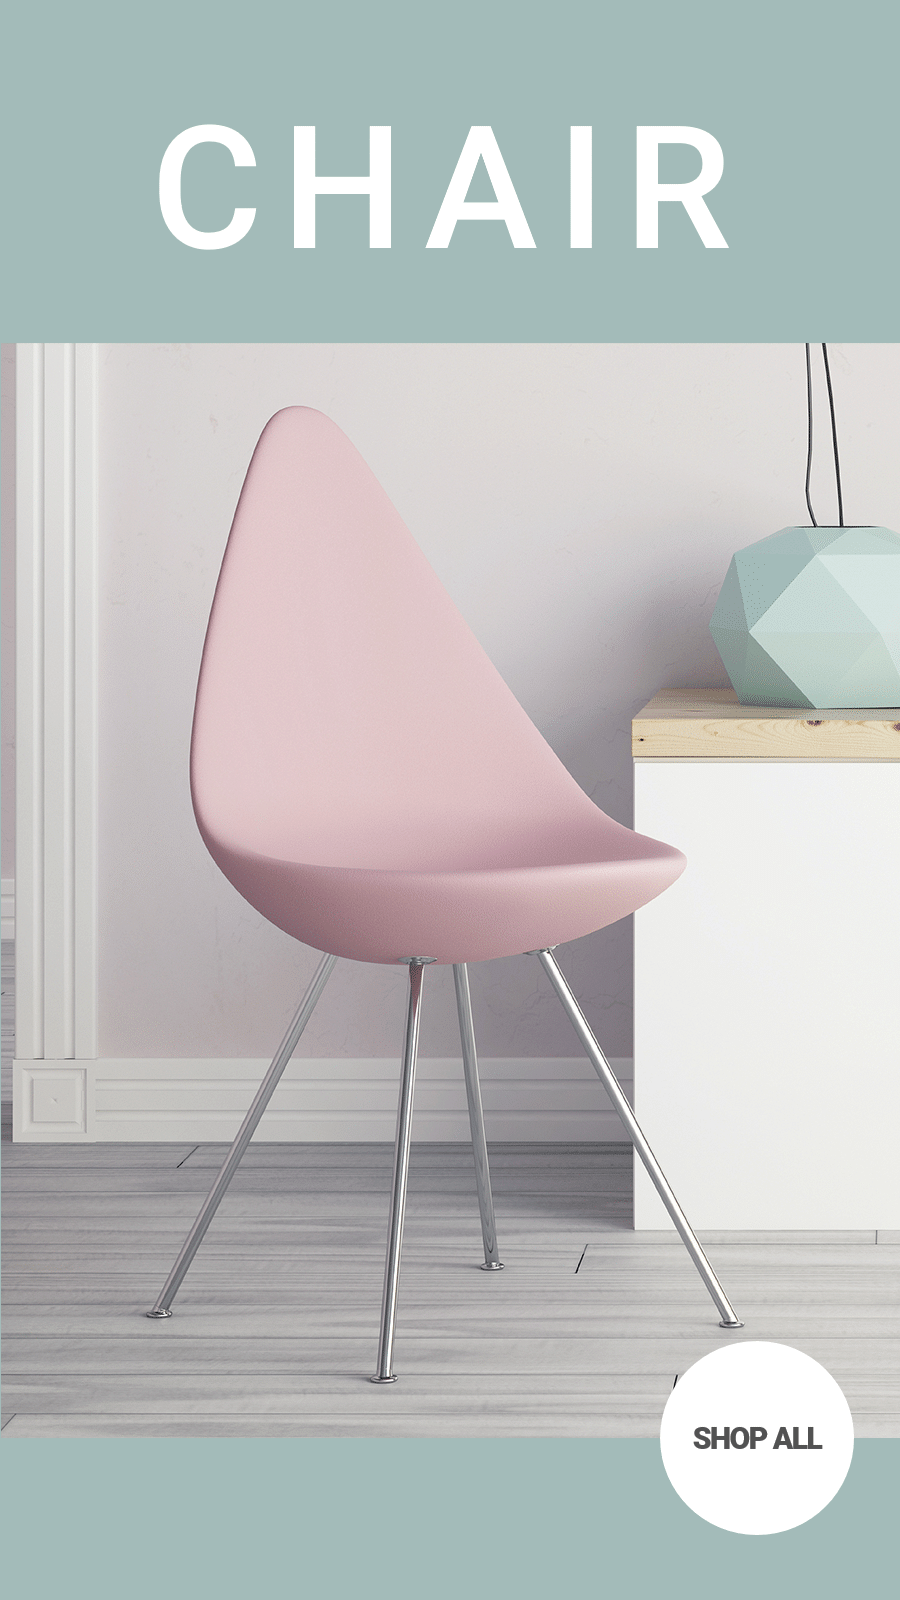 Furniture Promotion Pink Chair Picture Simple Fashion Cool Style Instagram Highlight预览效果